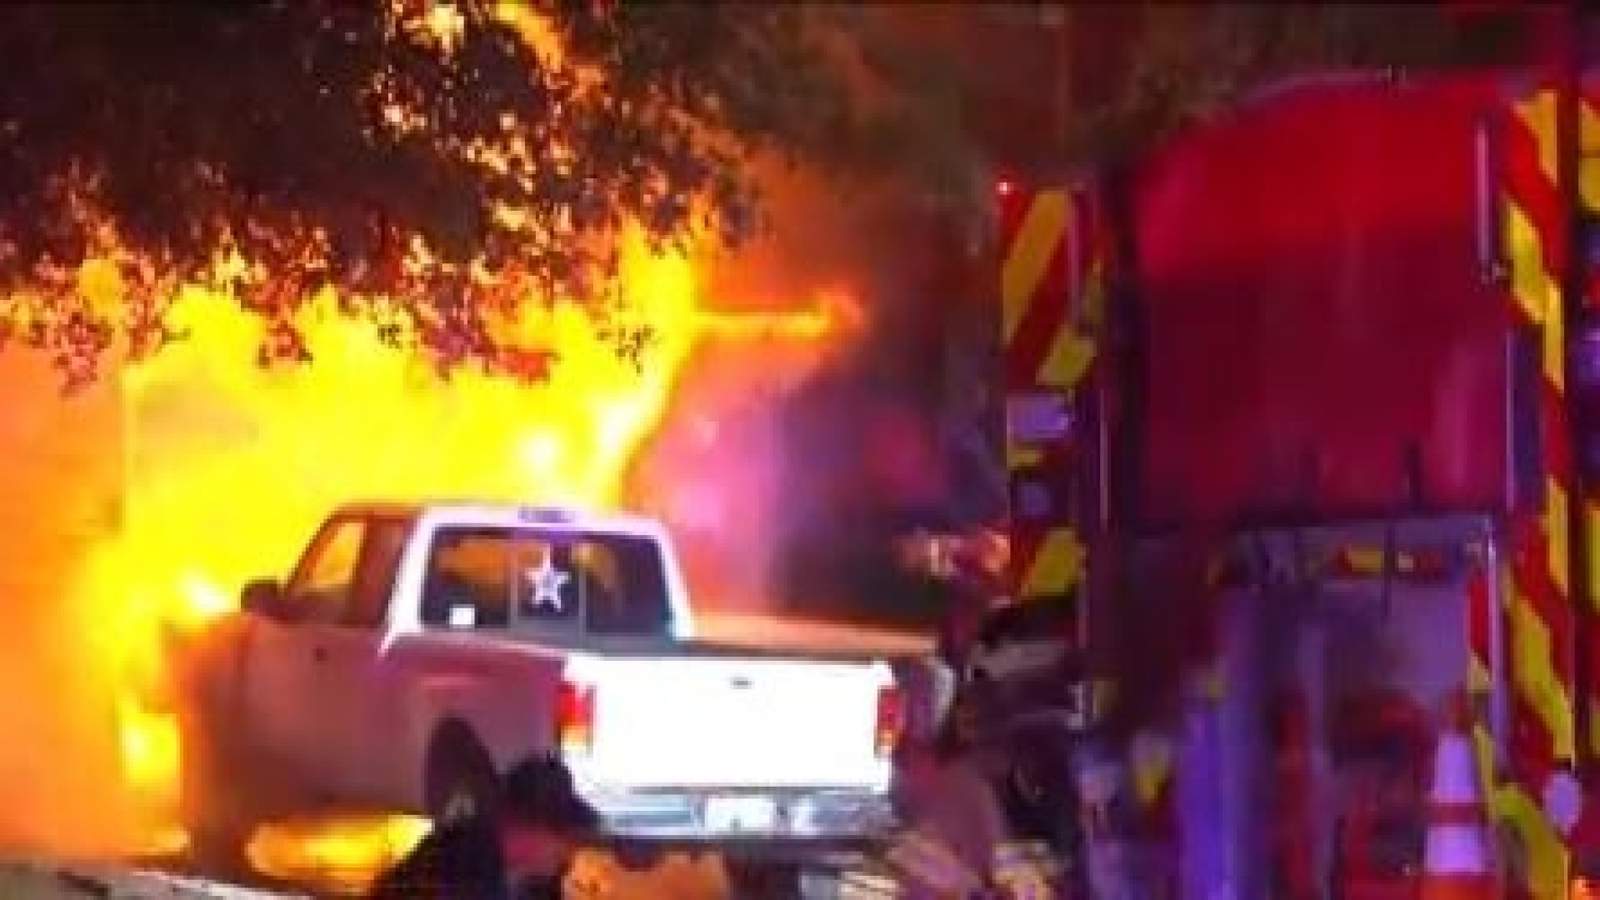 Family of 9 displaced after escaping large garage fire in Cypress